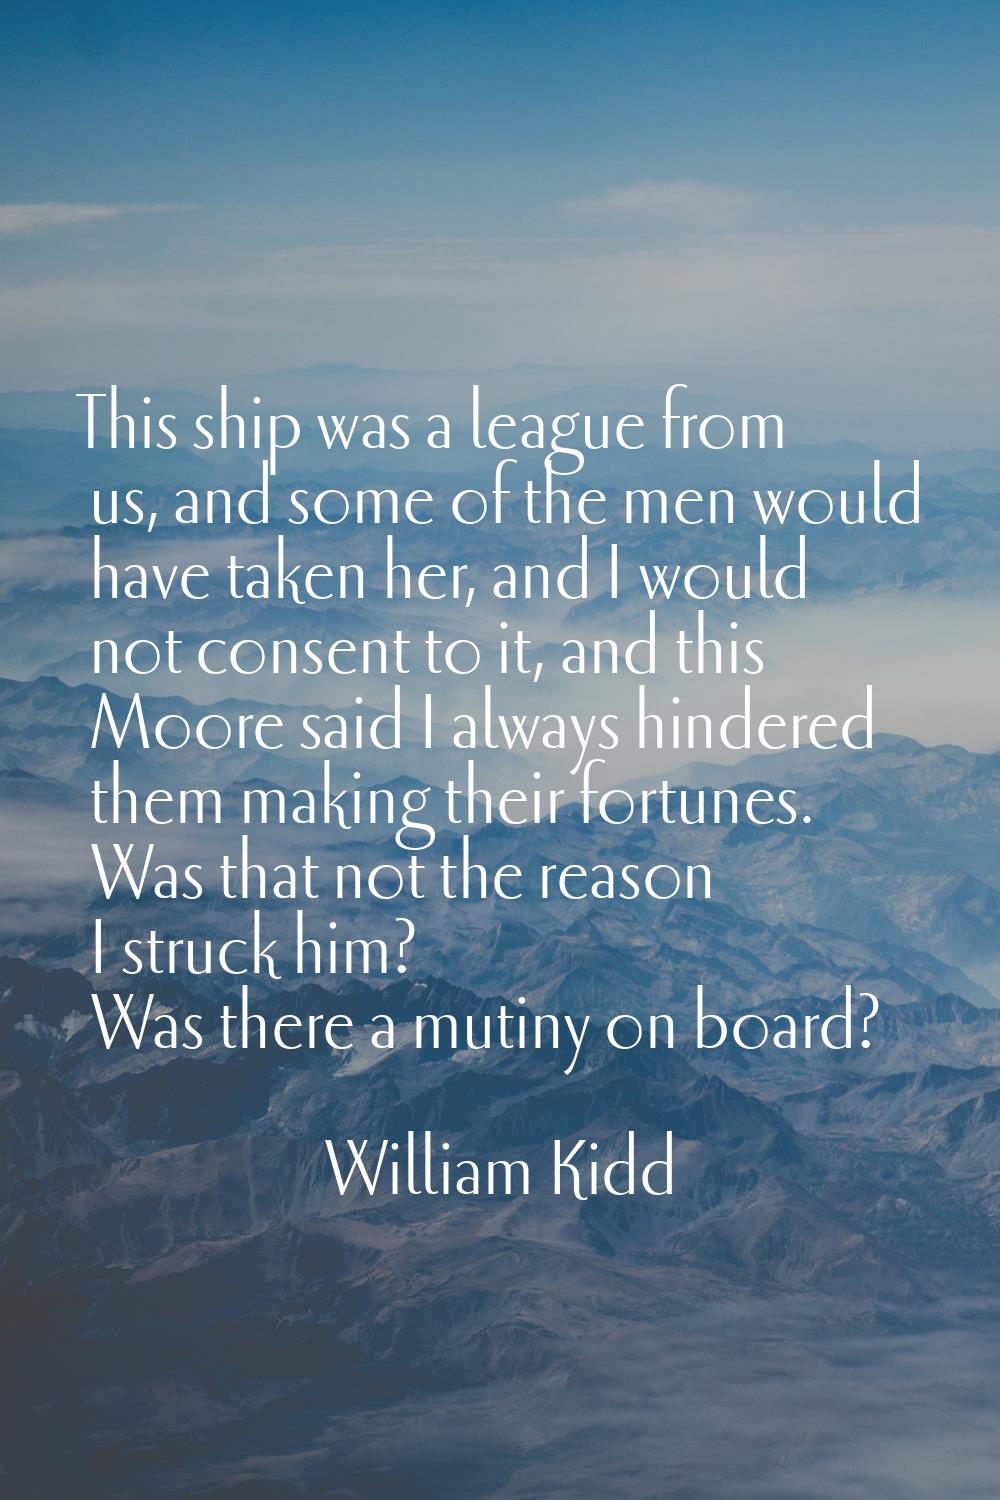 This ship was a league from us, and some of the men would have taken her, and I would not consent t